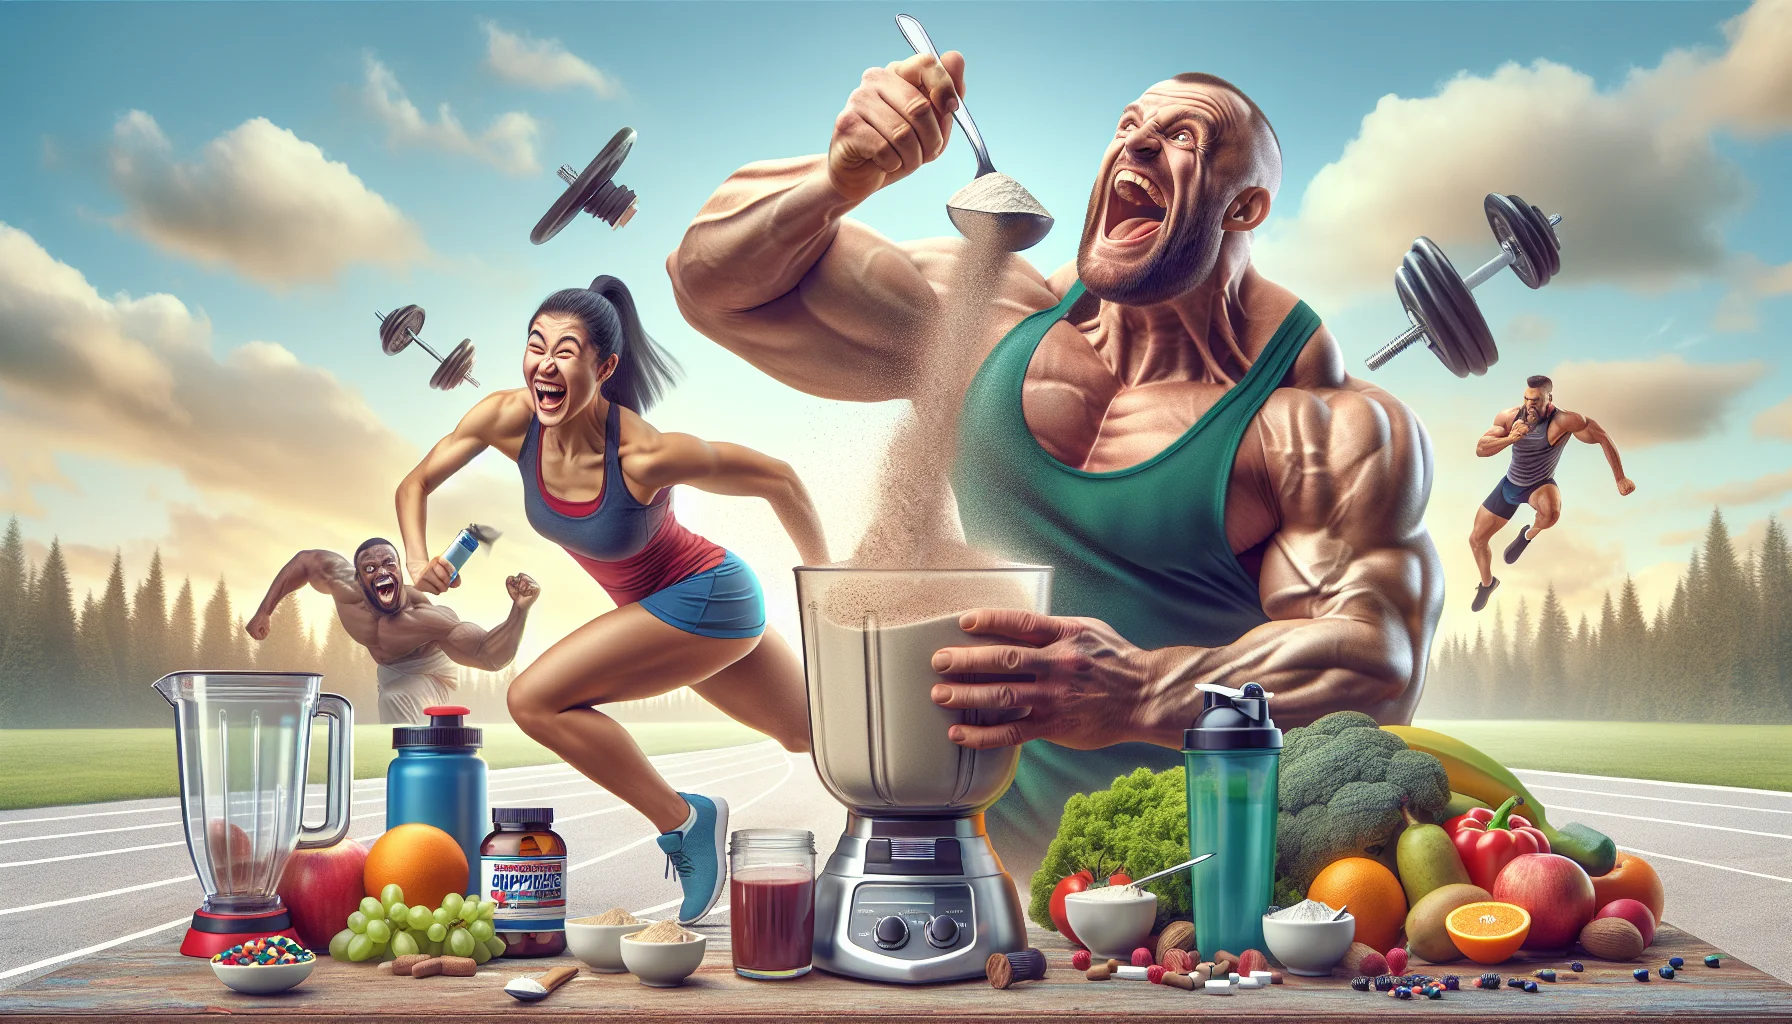 Create a realistic and humorous image that illustrates the interplay between sports and nutrition. This scene should prominently feature sports supplements in a positive, appealing light. There could be a depicted scenario of a Caucasian male weightlifter and a South Asian female runner, both laughter-inducing, each preparing their respective sports supplements in an exaggerated manner. The runner could be mixing a large spoonful of supplement powder into a bottle of water, while the weightlifter might be pouring supplement powder into a massive blender. The background could emphasize a healthy lifestyle, perhaps with sports equipment, fruits, and vegetables seen scattered around.